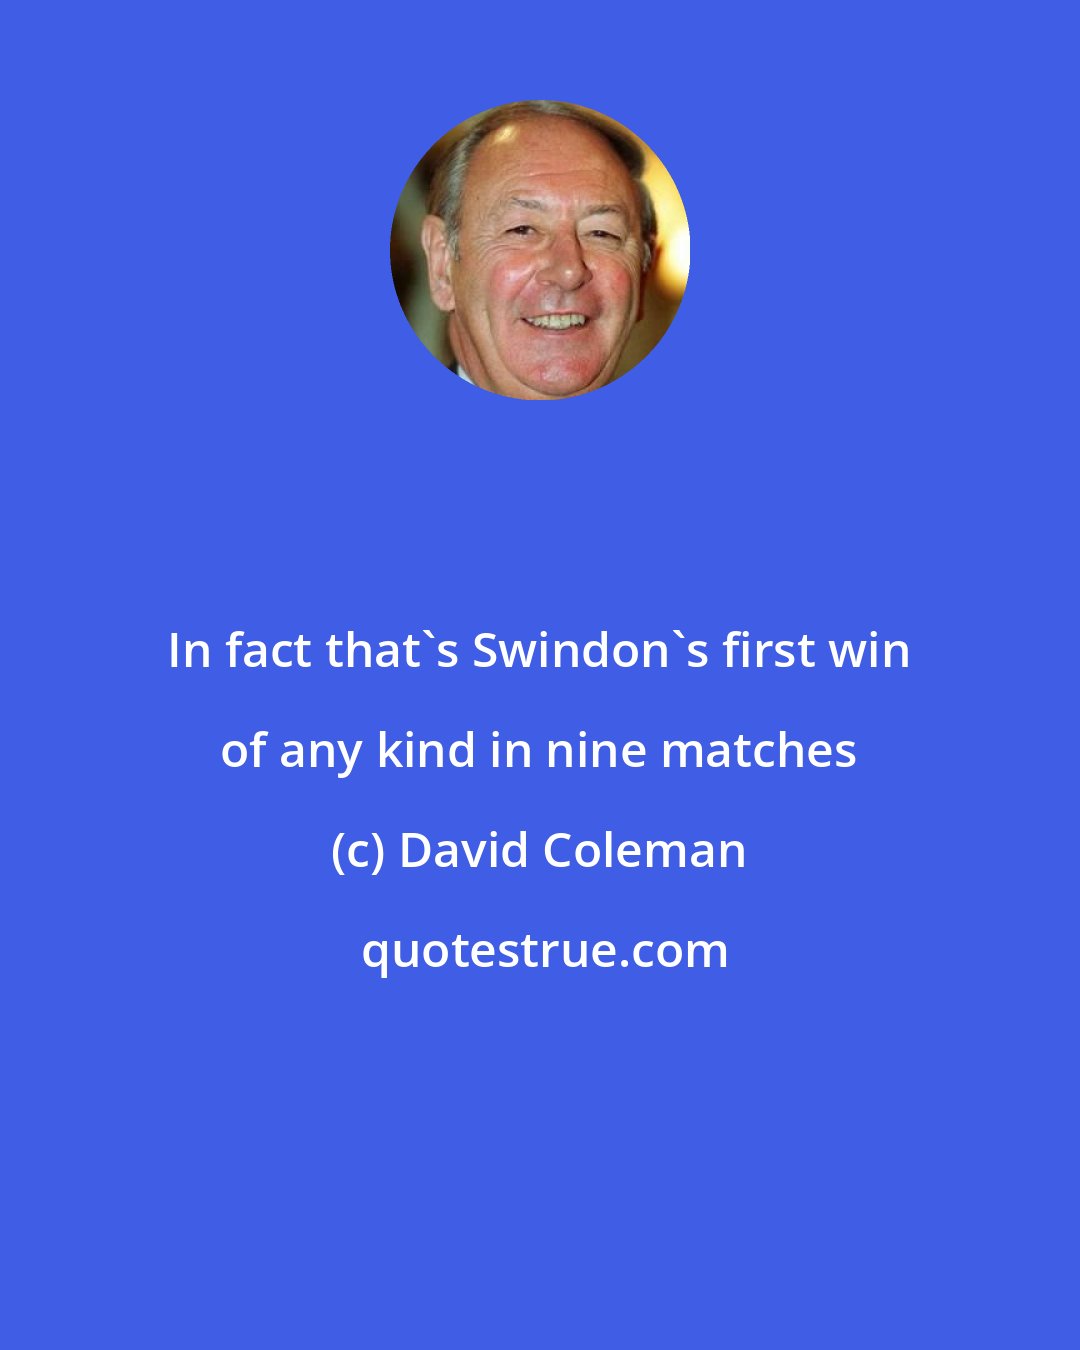 David Coleman: In fact that's Swindon's first win of any kind in nine matches